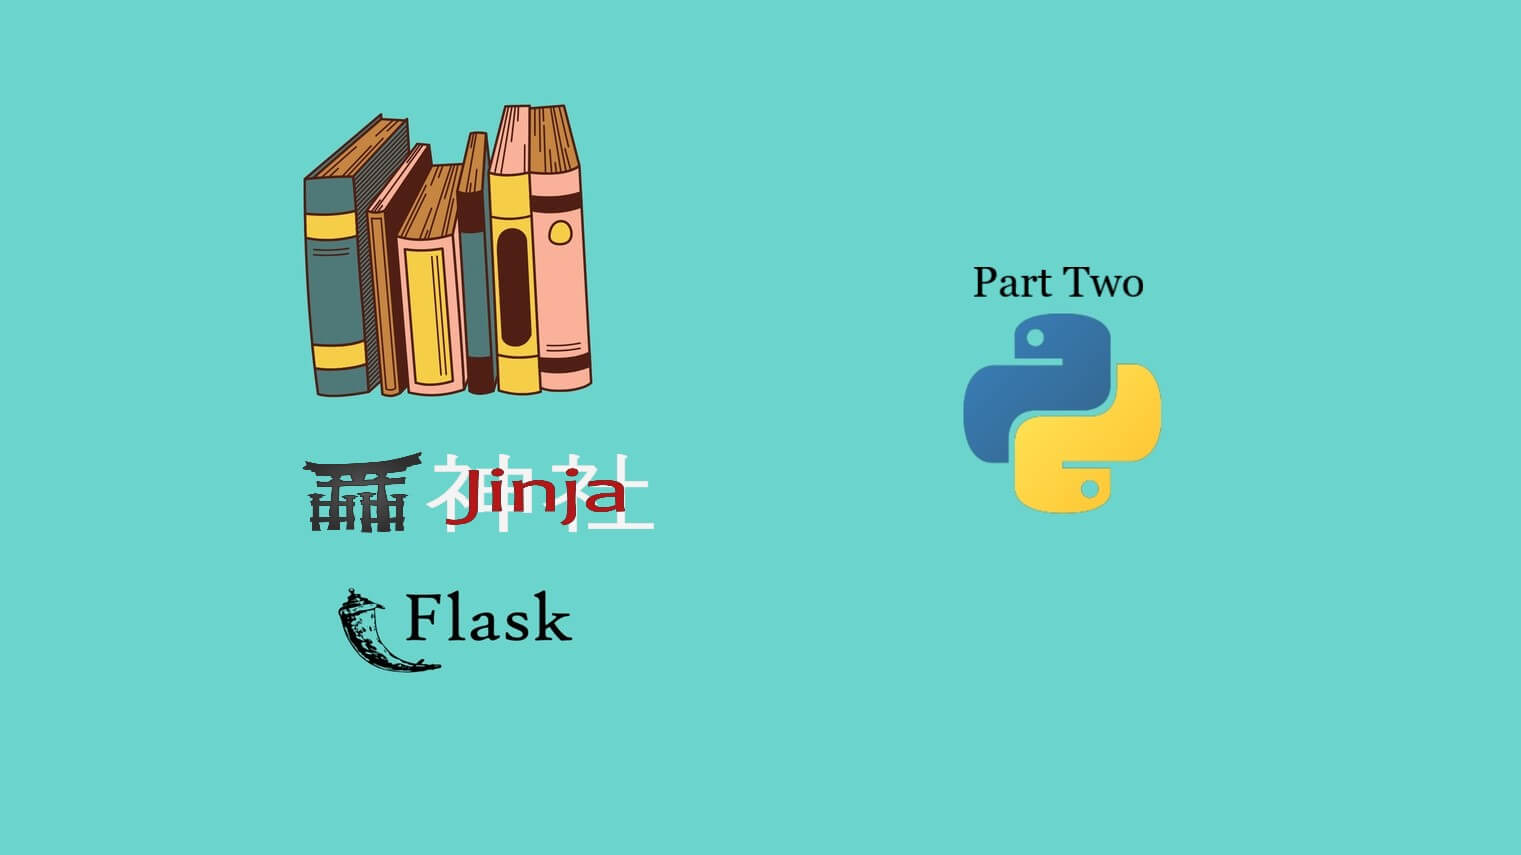 How to Build a Complete CRUD App using Flask and Jinja2 in Python